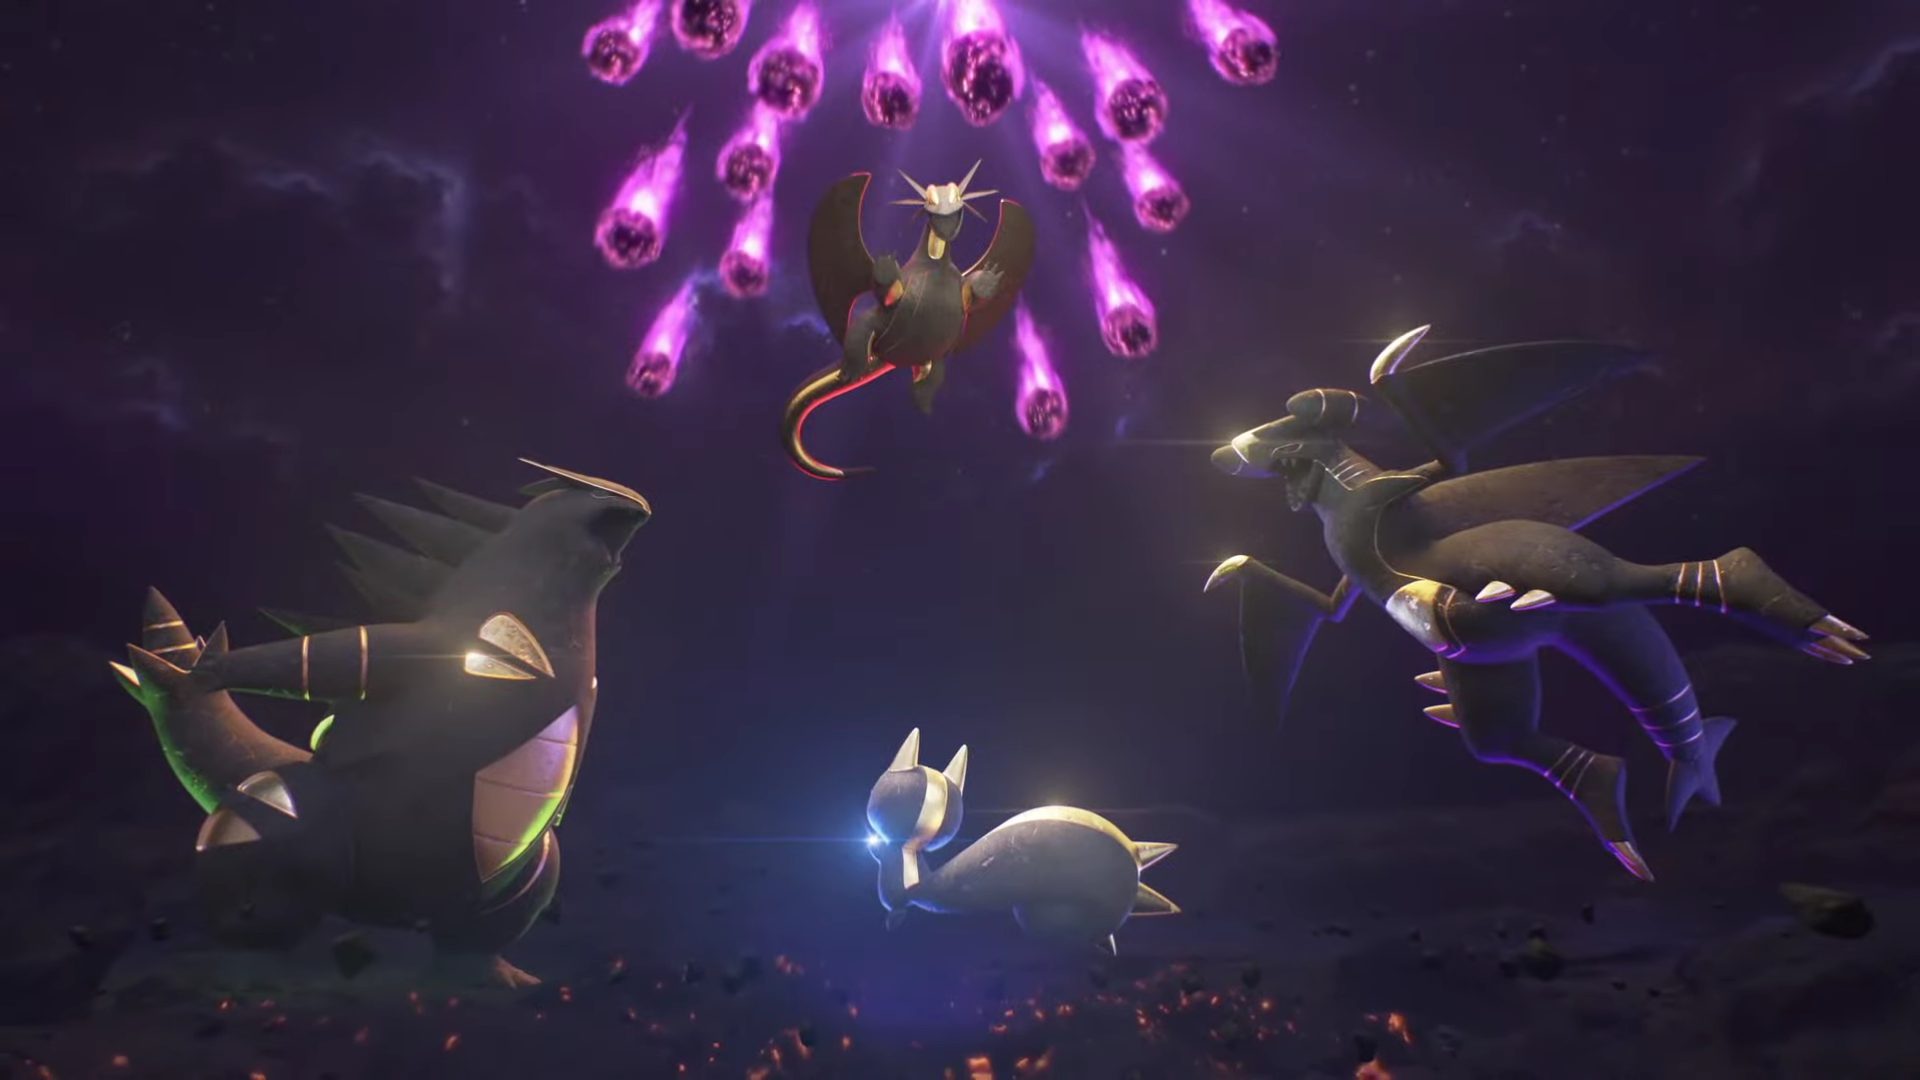 Check Out These Latest Pokemon Sword & Shield Hands-On Gameplay